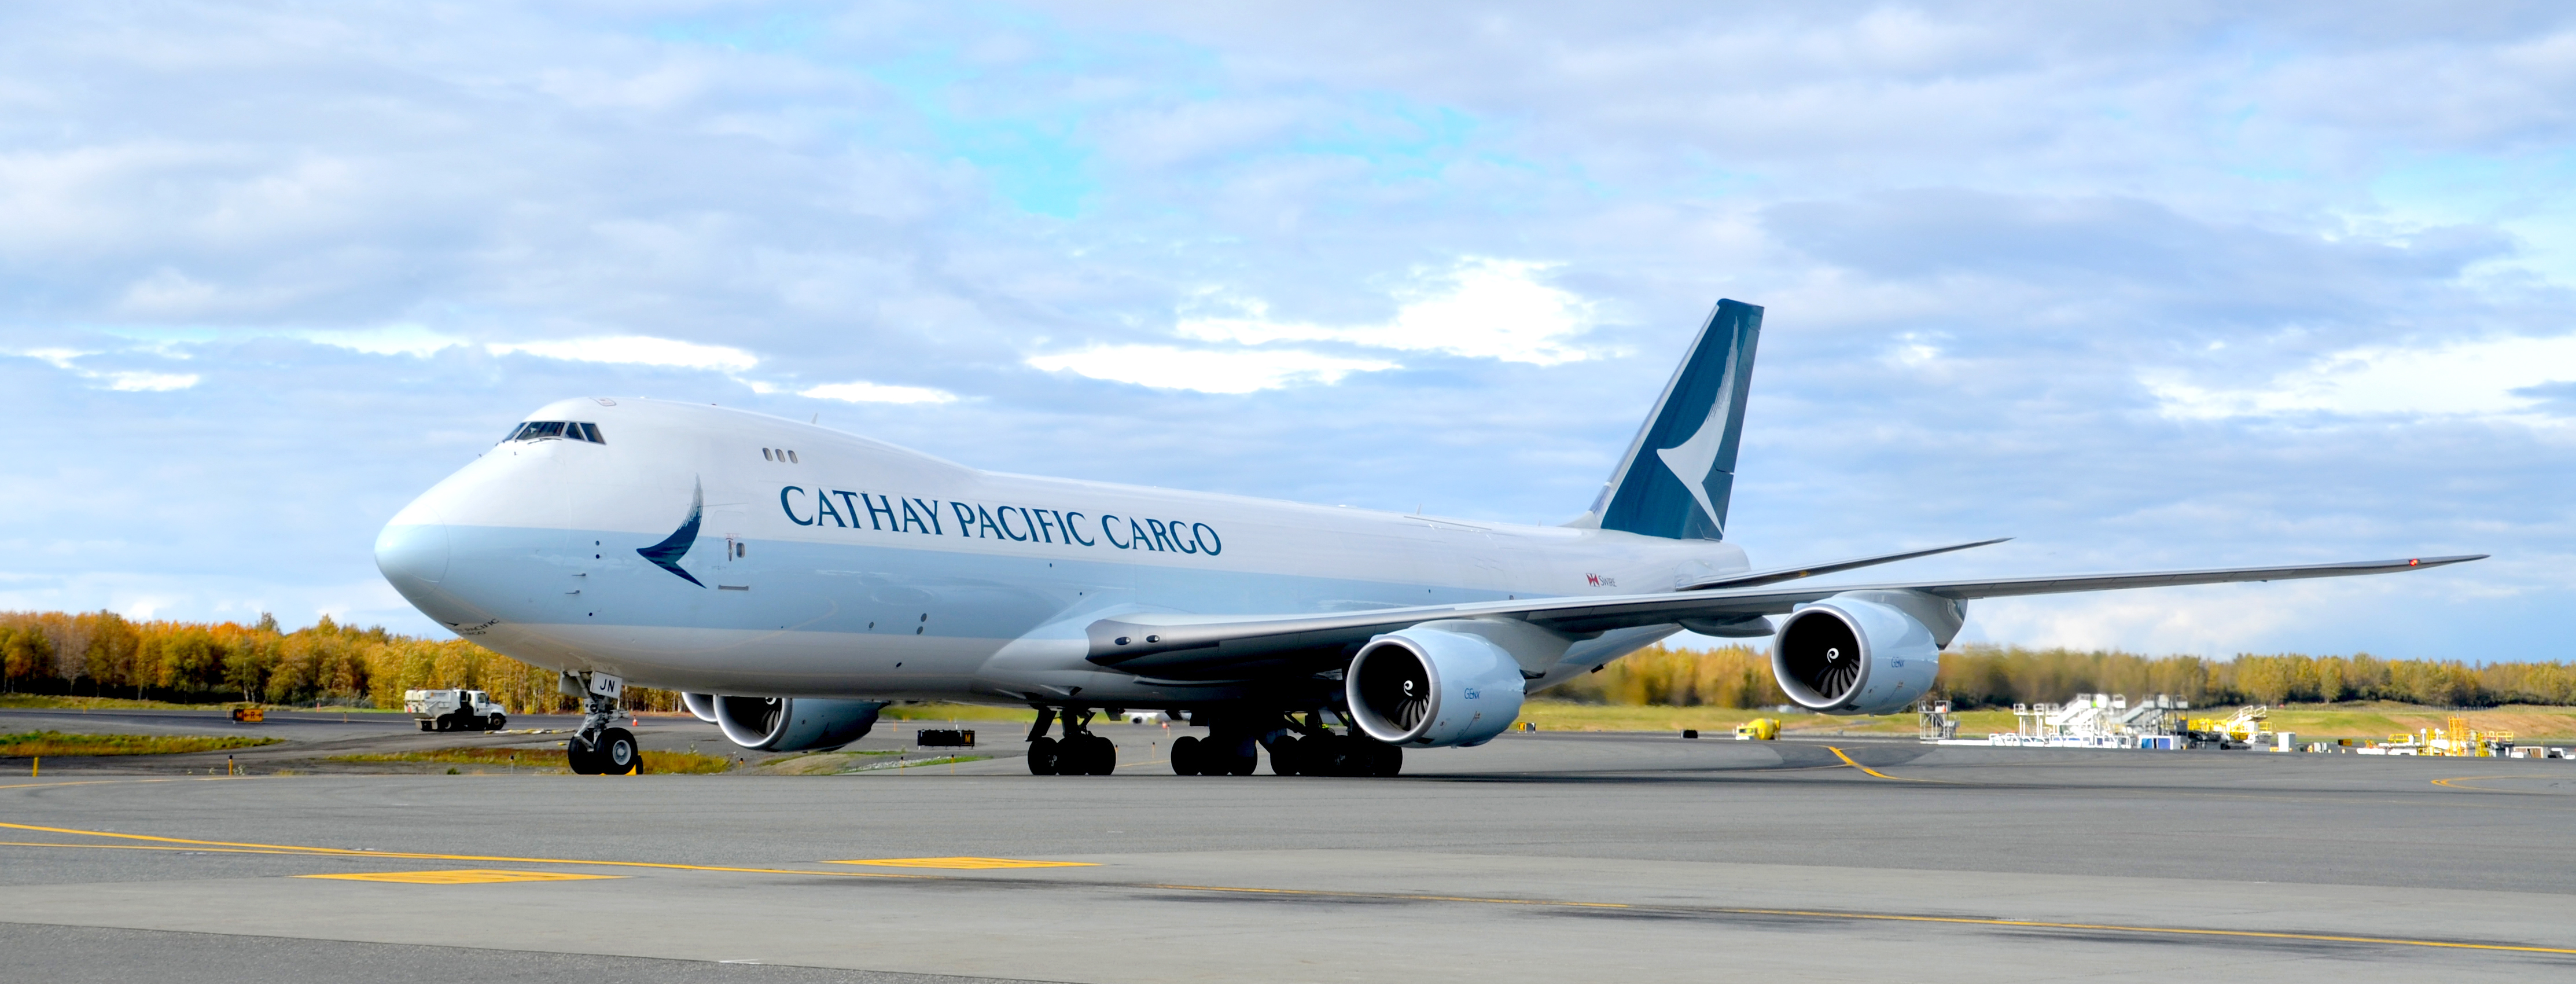 Cathay Pacific Airways expands its freighter services in Southwest Pacific with new weekly service to Brisbane West Wellcamp Airport 